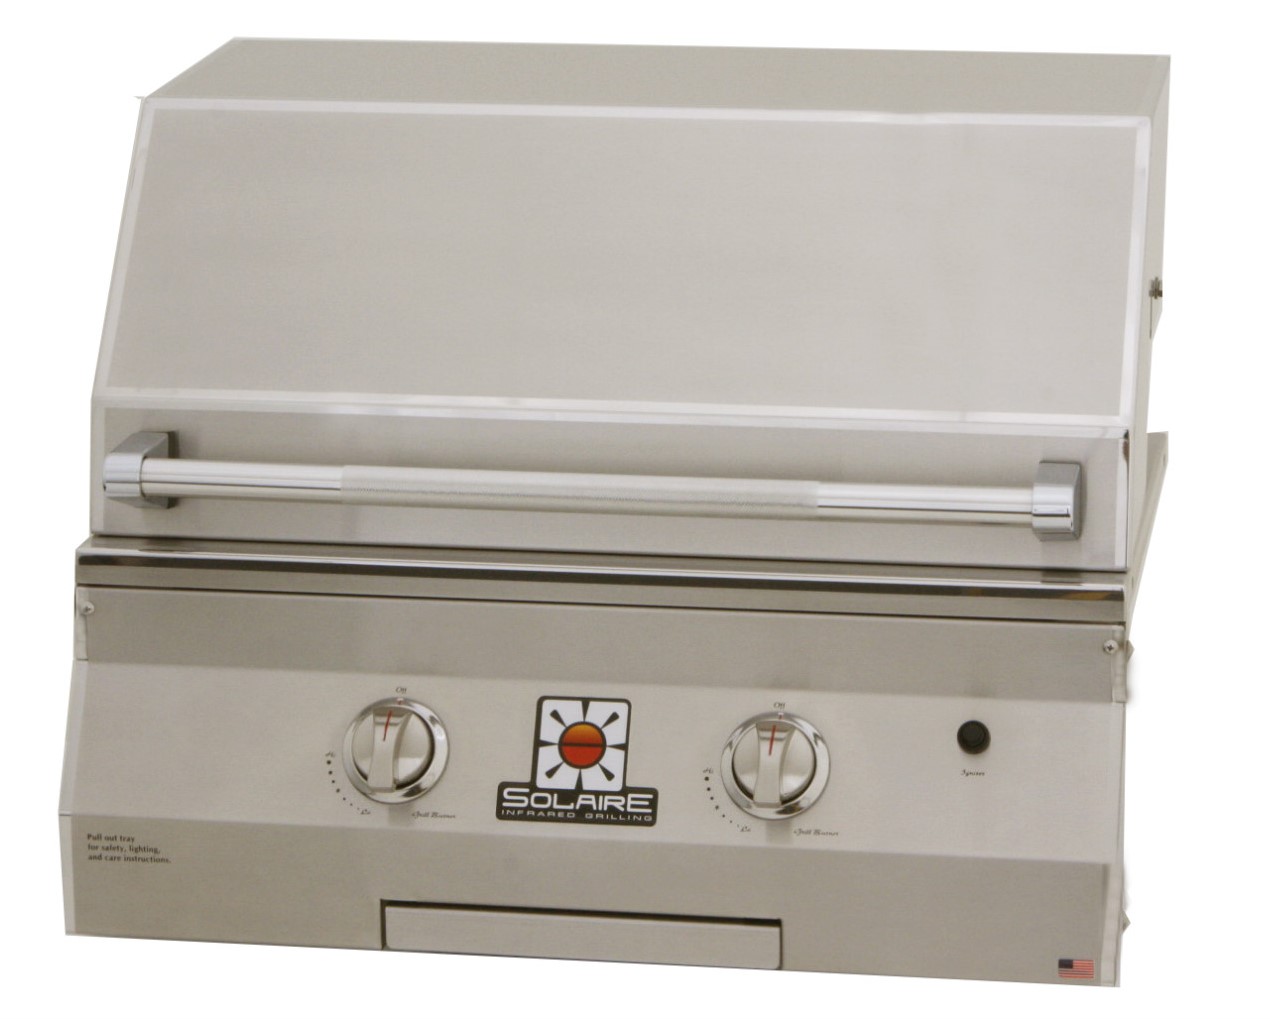 Solaire AGBQ-27 Built-in Grill